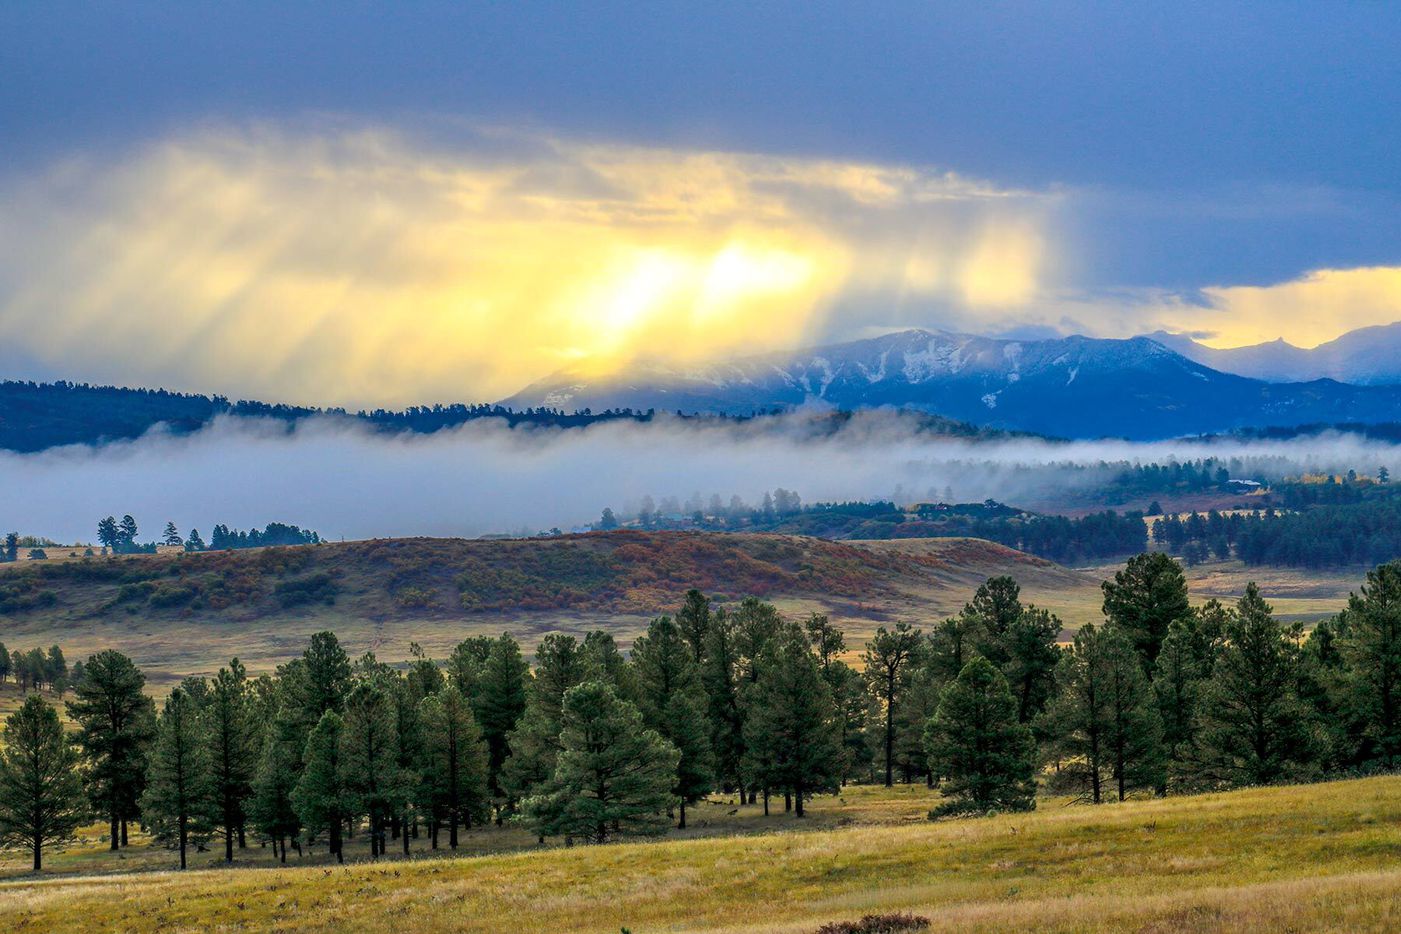 CEO and founder of McKinney-based Service First Mortgage Shawn Broussard, along with his wife Martha Broussard, purchased this 9,600-acre property in Pagosa Springs, Colorado. Piedra Valley Ranch will be stewarded under the Broussard Environmental and Wildlife Conservation Foundation.